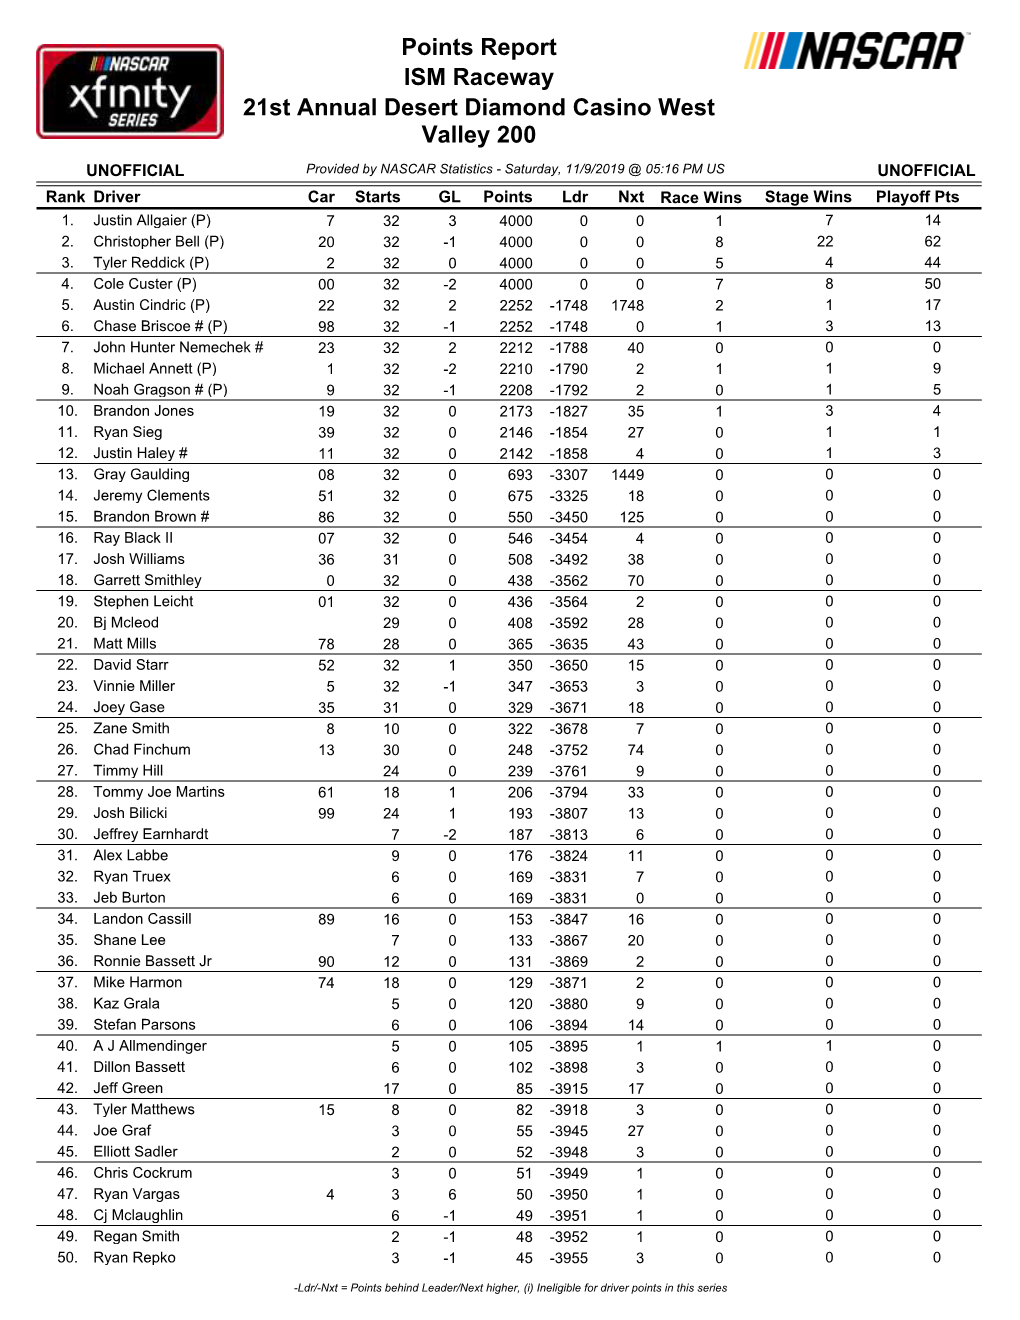 Drivers Points Standings